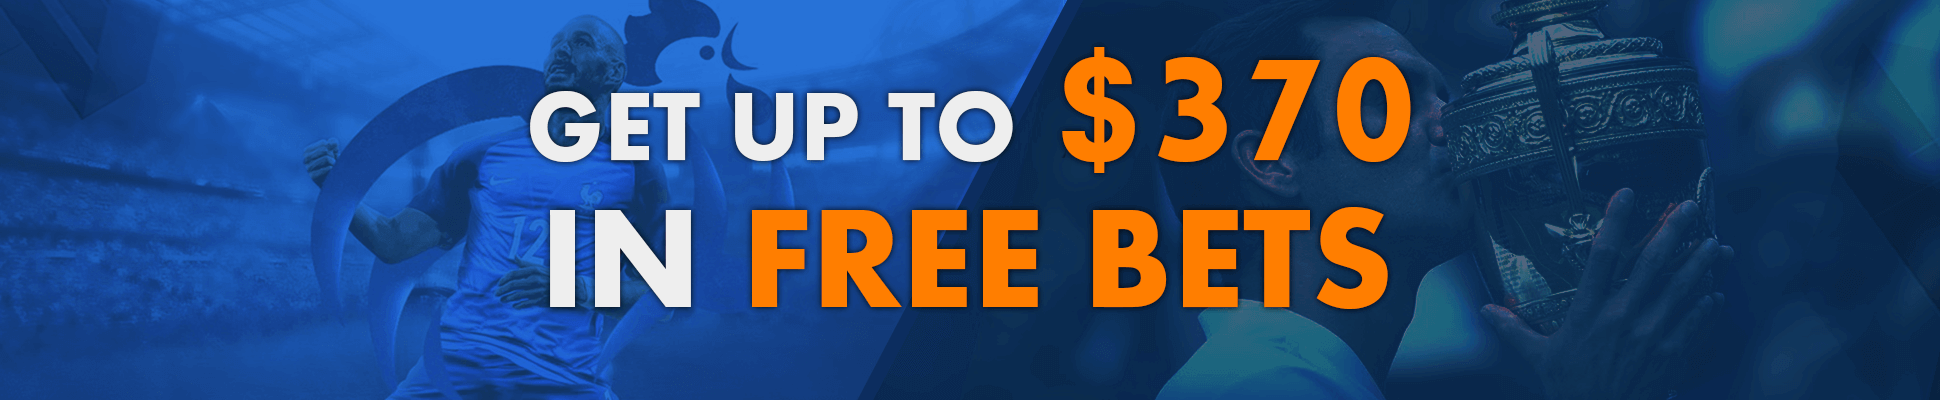 Vip Bet Free Bets Banner